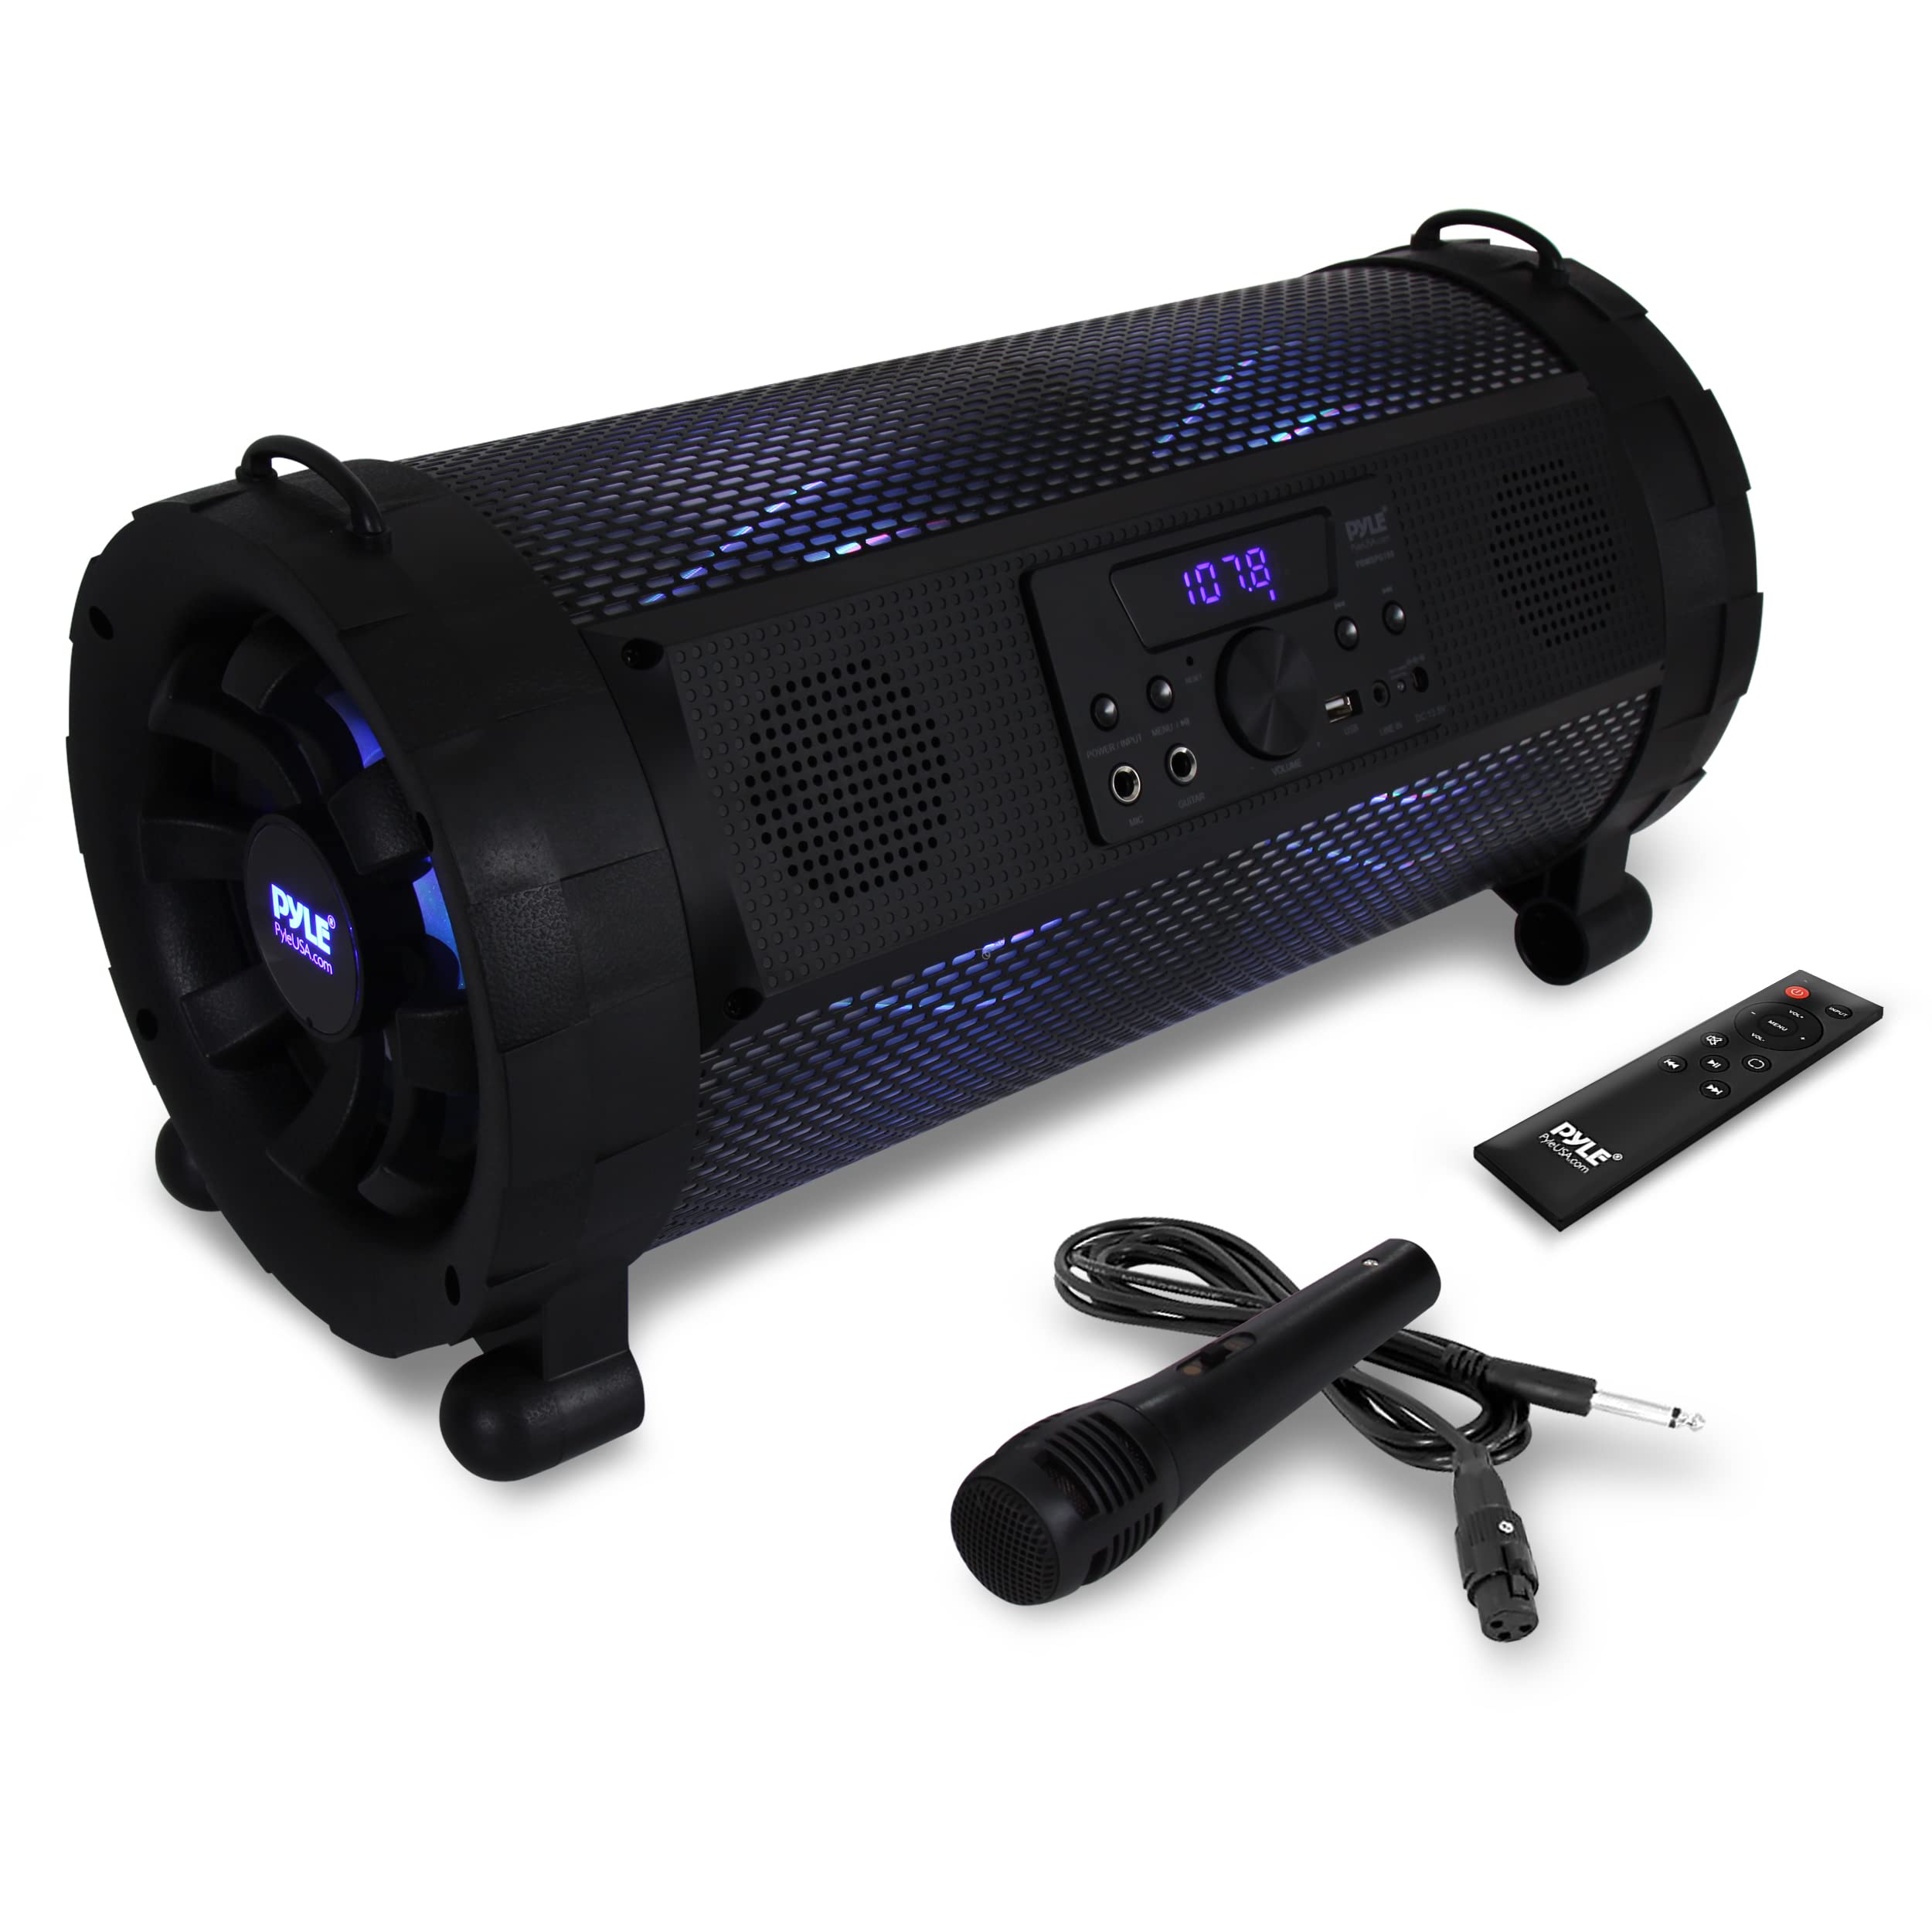 Pyle Bluetooth Boombox Street Blaster Stereo Speaker - Portable Wireless Power FM Radio / MP3 System w/ Remote, LED Lights & Rechargeable Battery - PBMSPG190 , Black